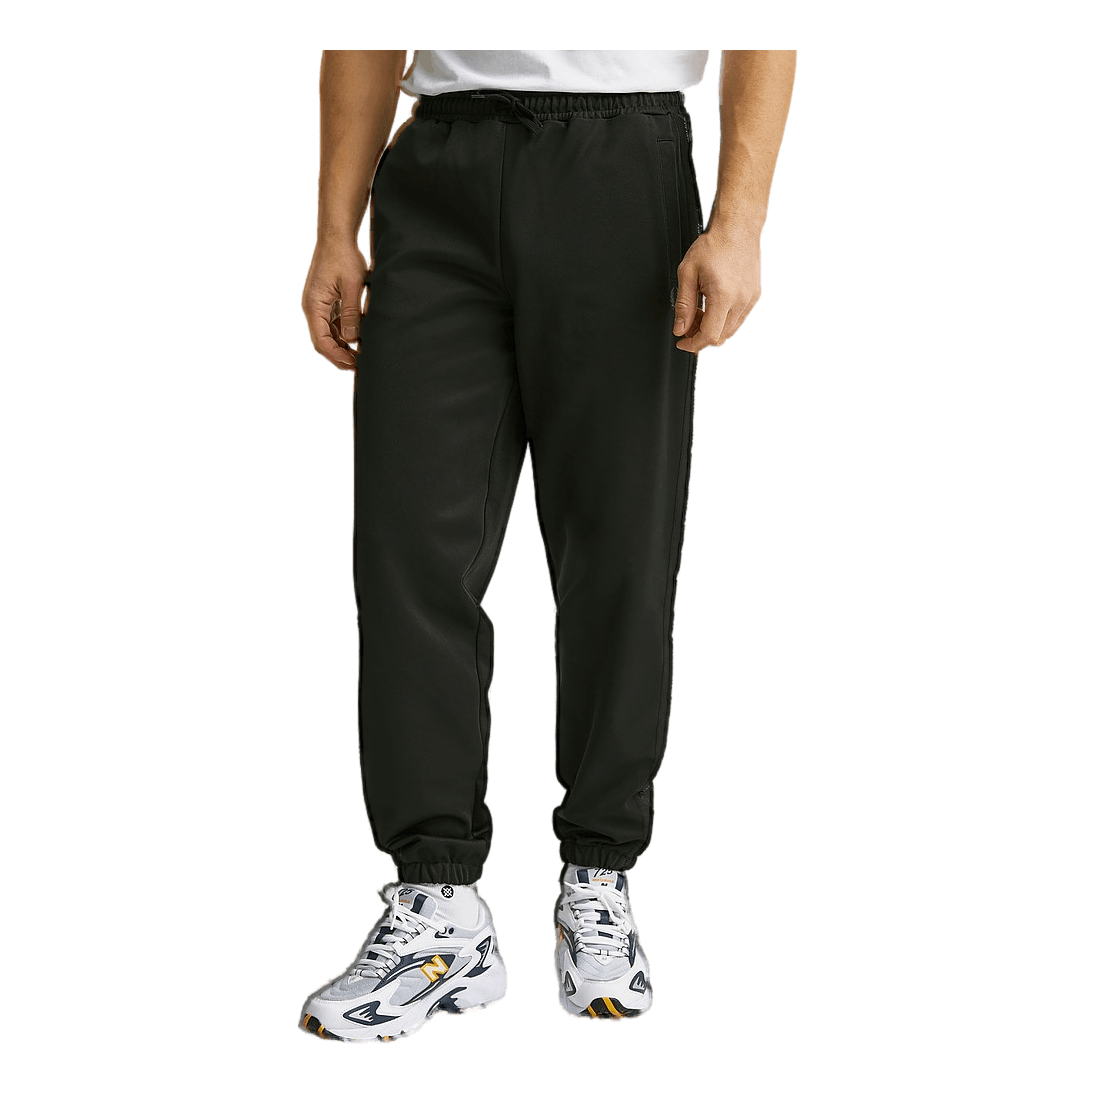 Fred Perry Tonal Tape Trk Pant